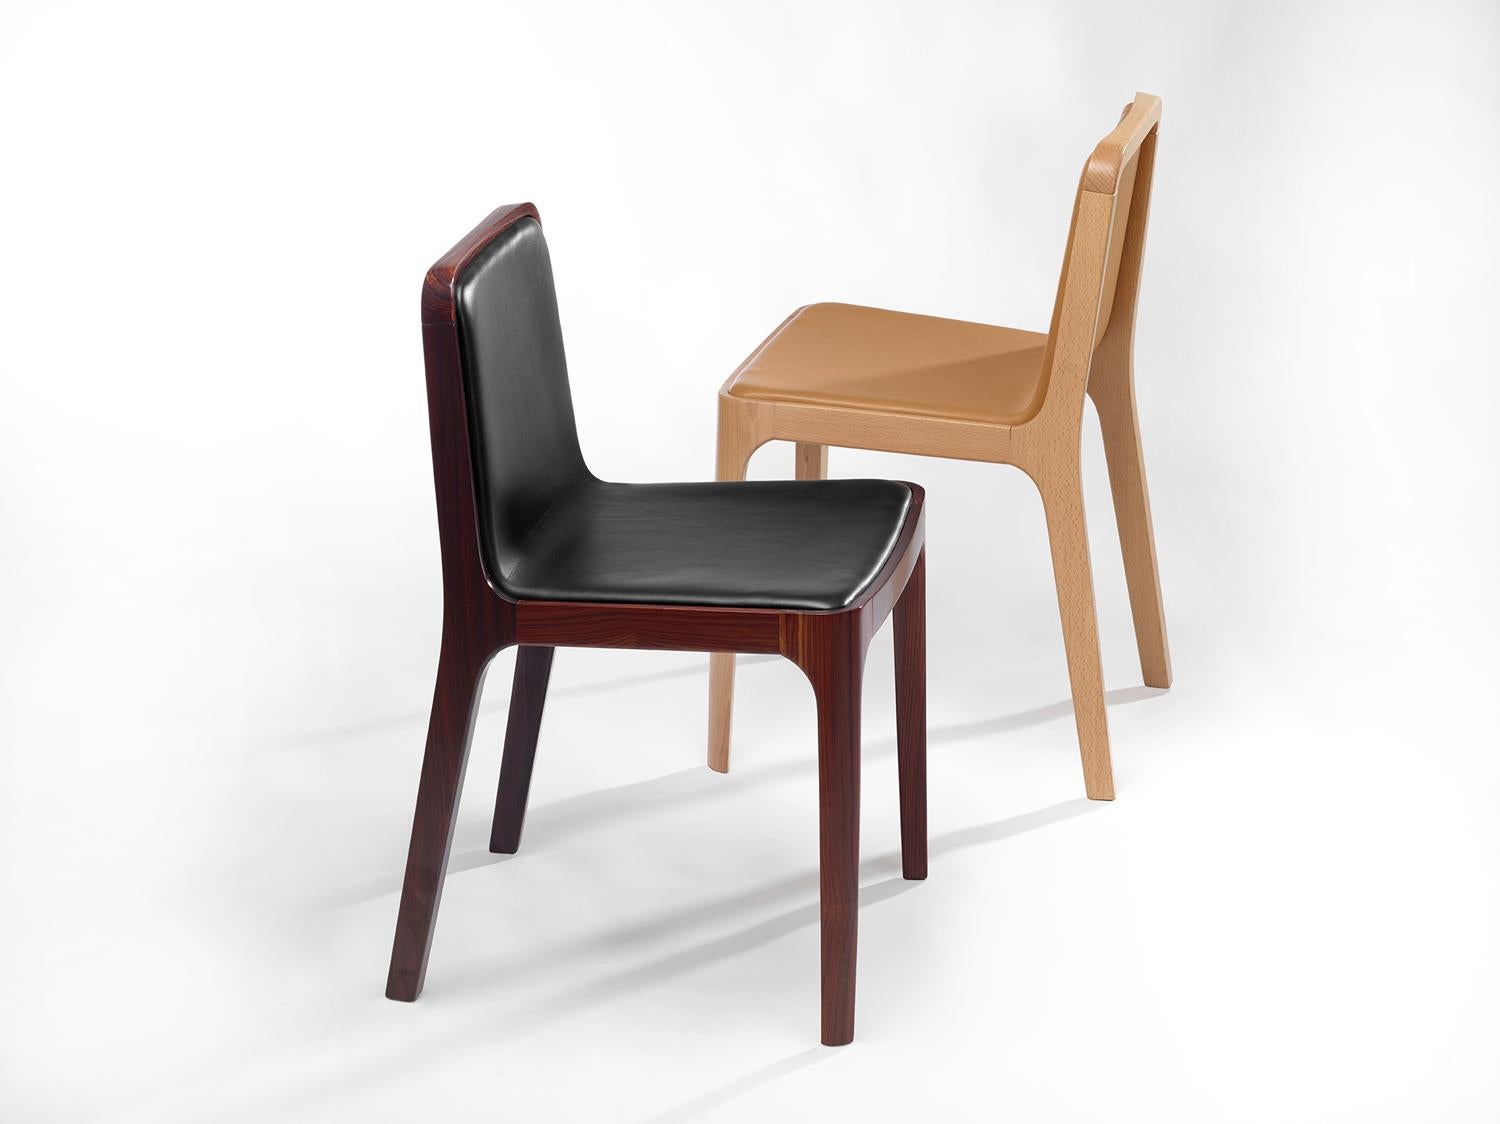 Minimalist Modern Chair, Ash Wood / Walnut Stained Finnishing Fabric Upholstery For Sale 5